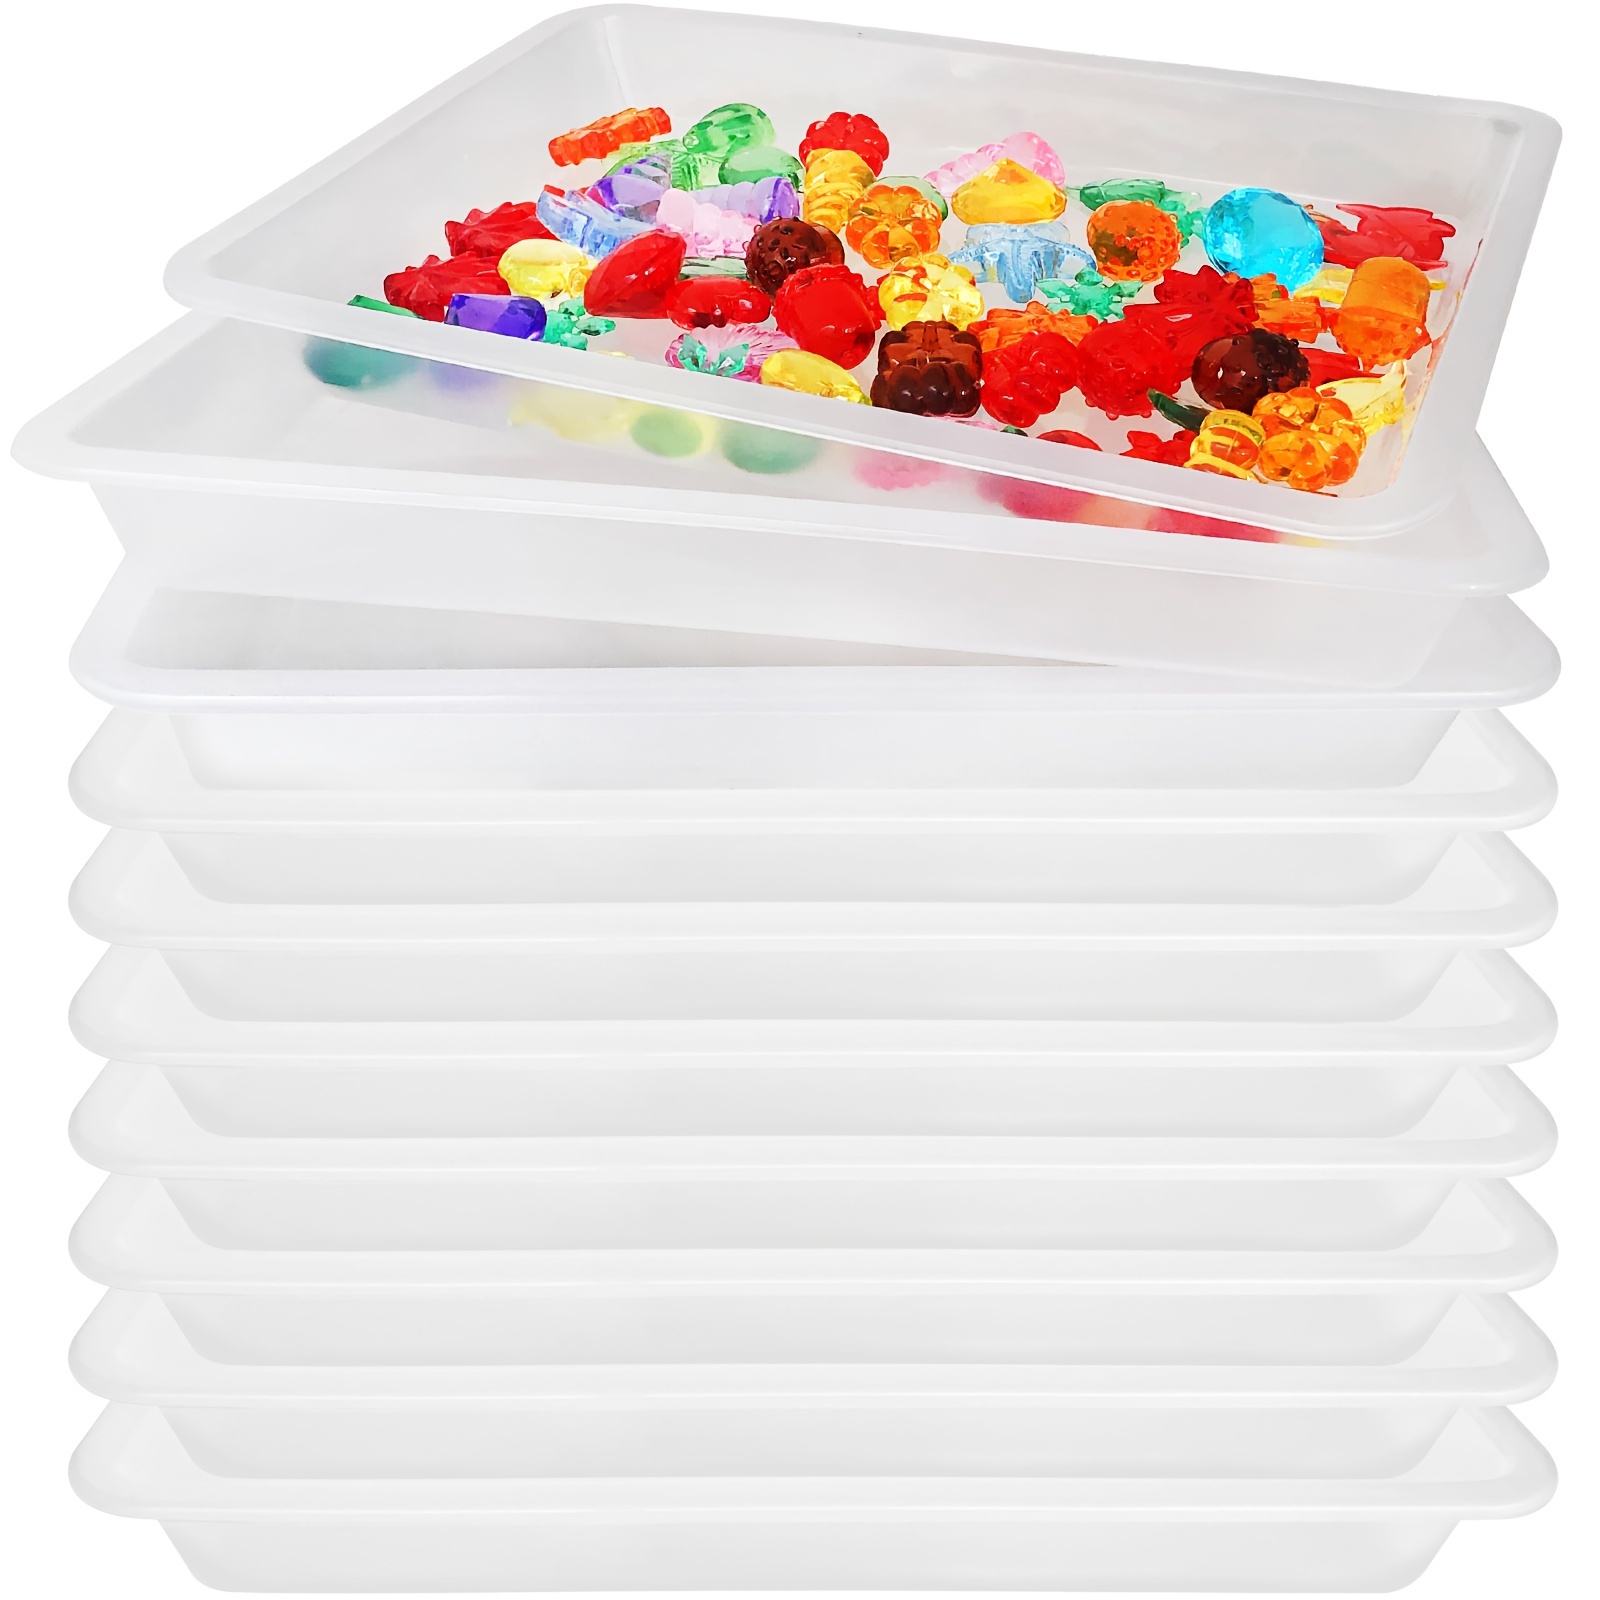 

10-piece Stackable Plastic Art Trays - Versatile Craft & Storage Organizer For School, Home, Painting, Beads, Diy Projects - Transparent, 11x8.27x1.18 Inches